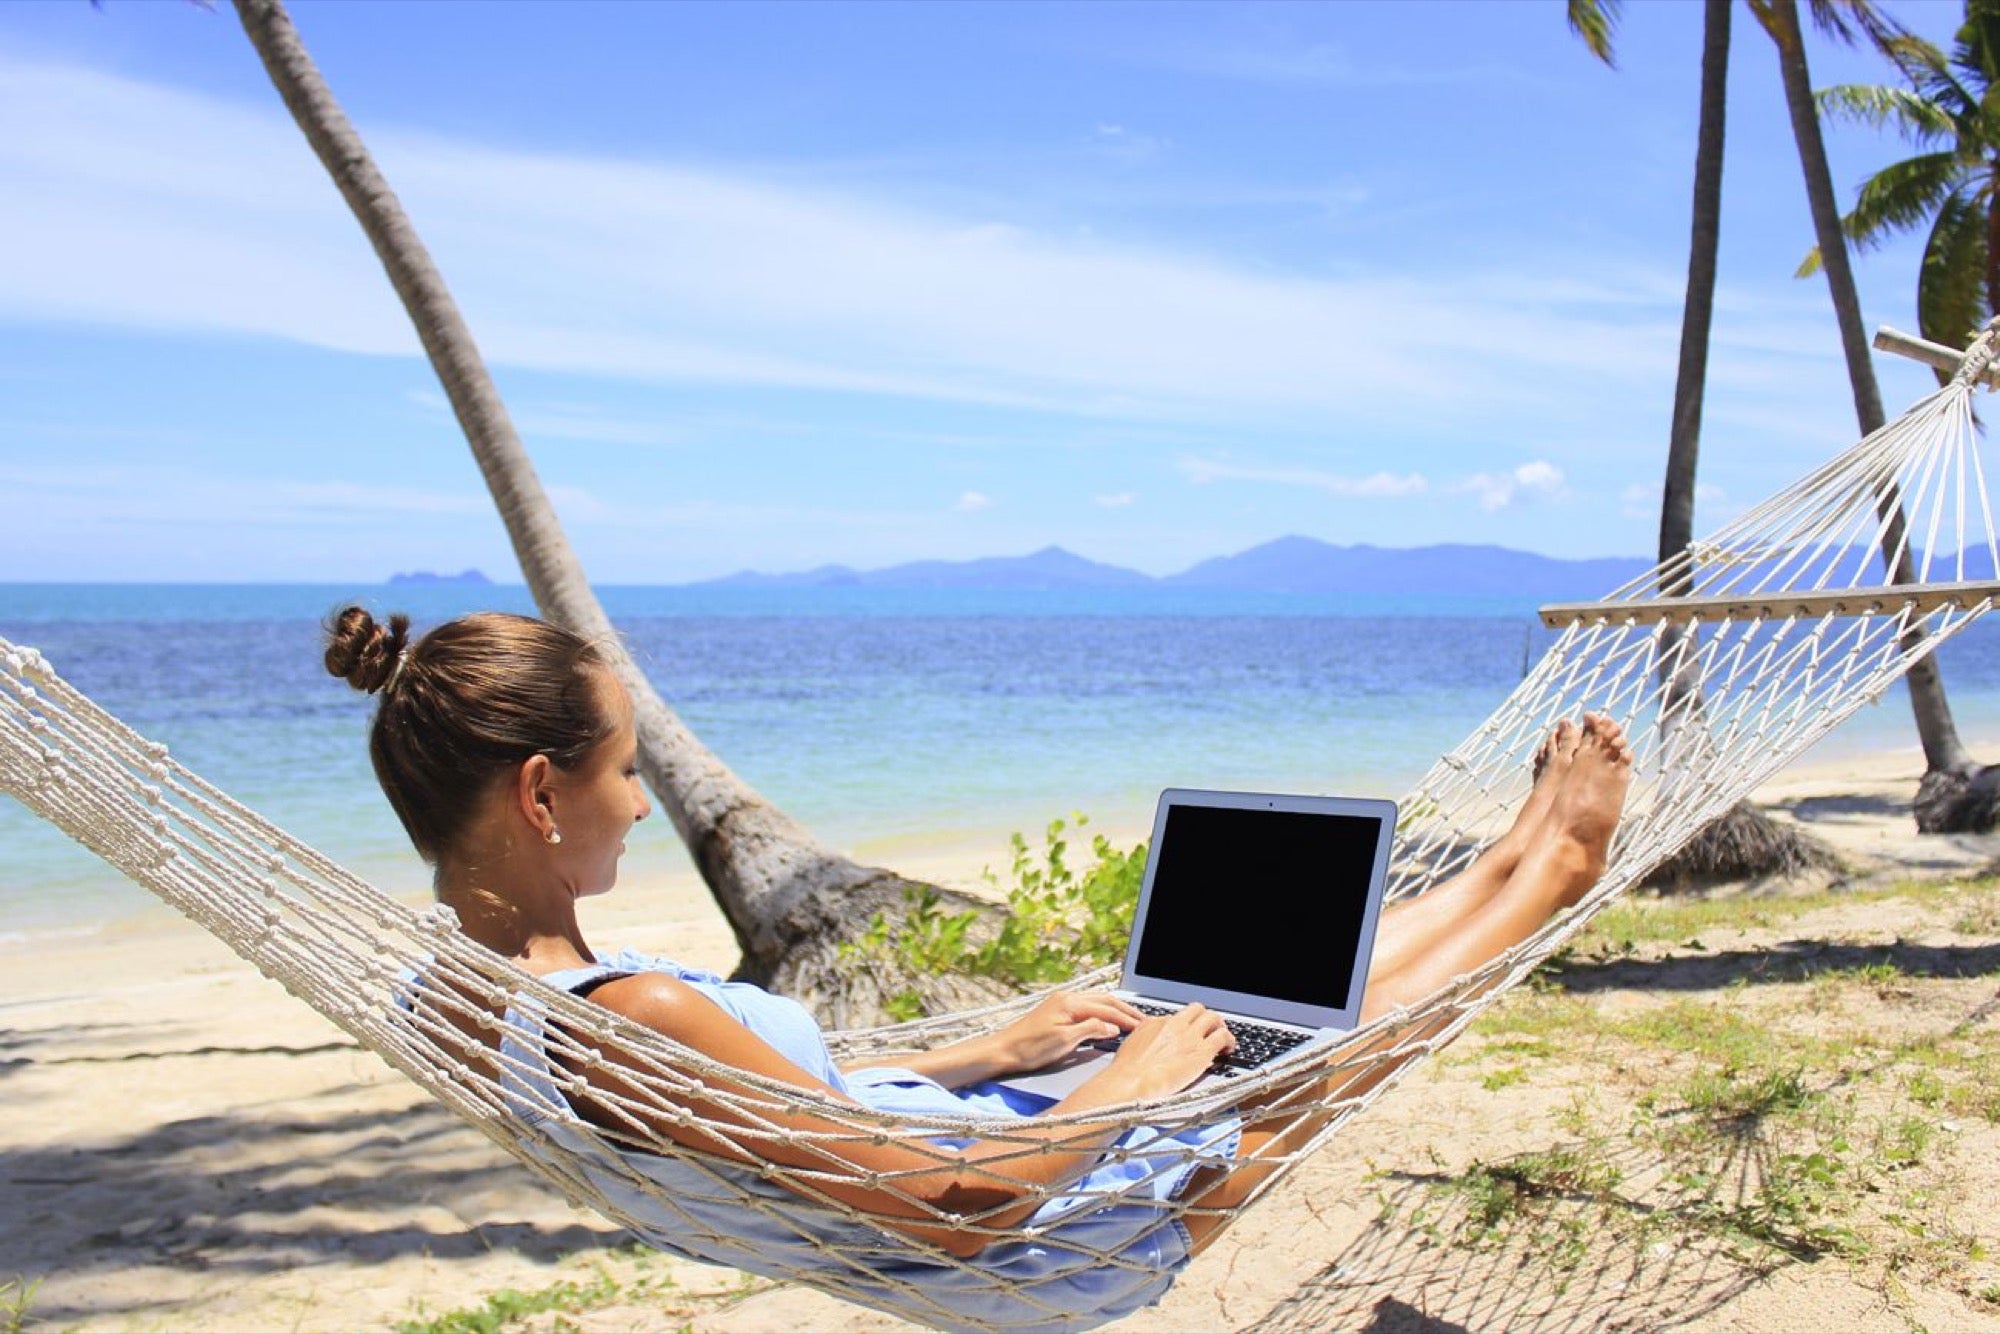 The Rise of Digital Nomads: An In-Depth Look at the Modern, Mobile Workforce